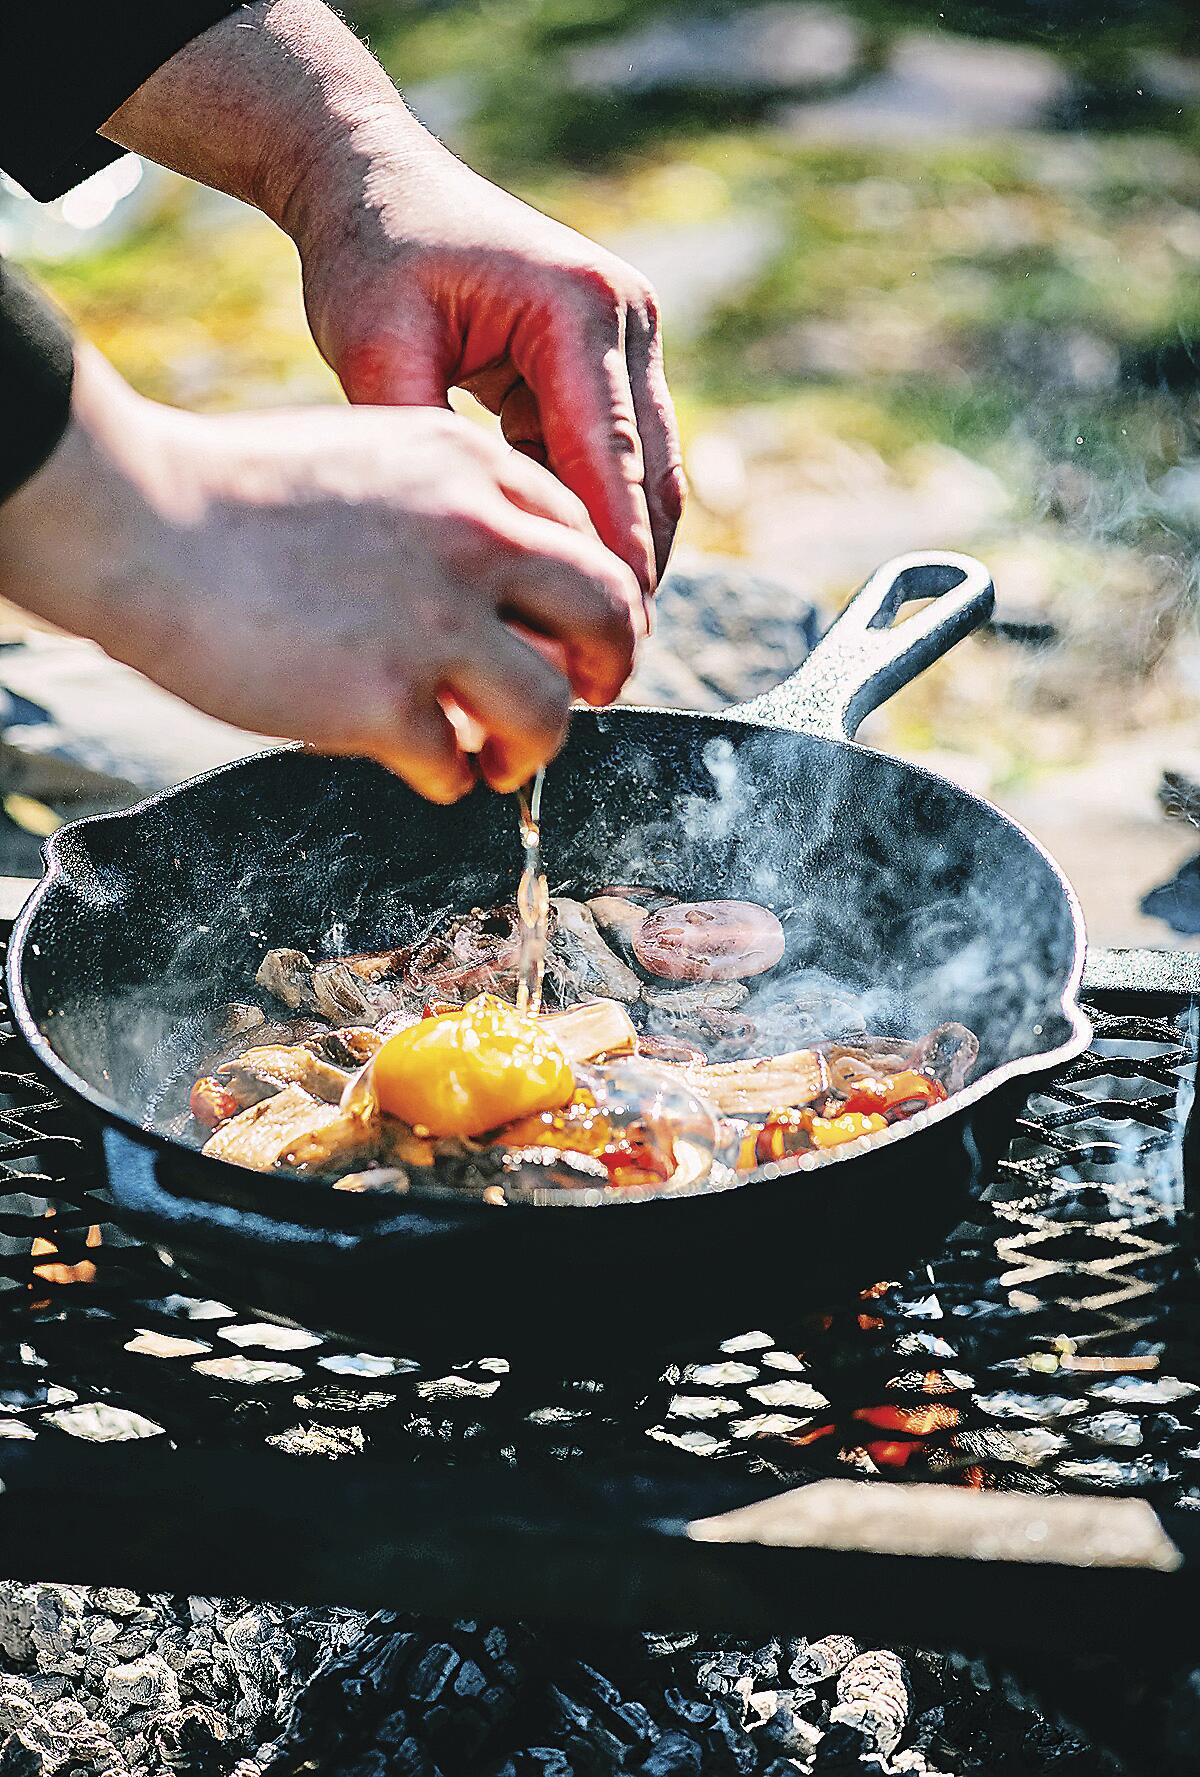 A person cooks breakfast in a cast-iron skillet over a campfire.